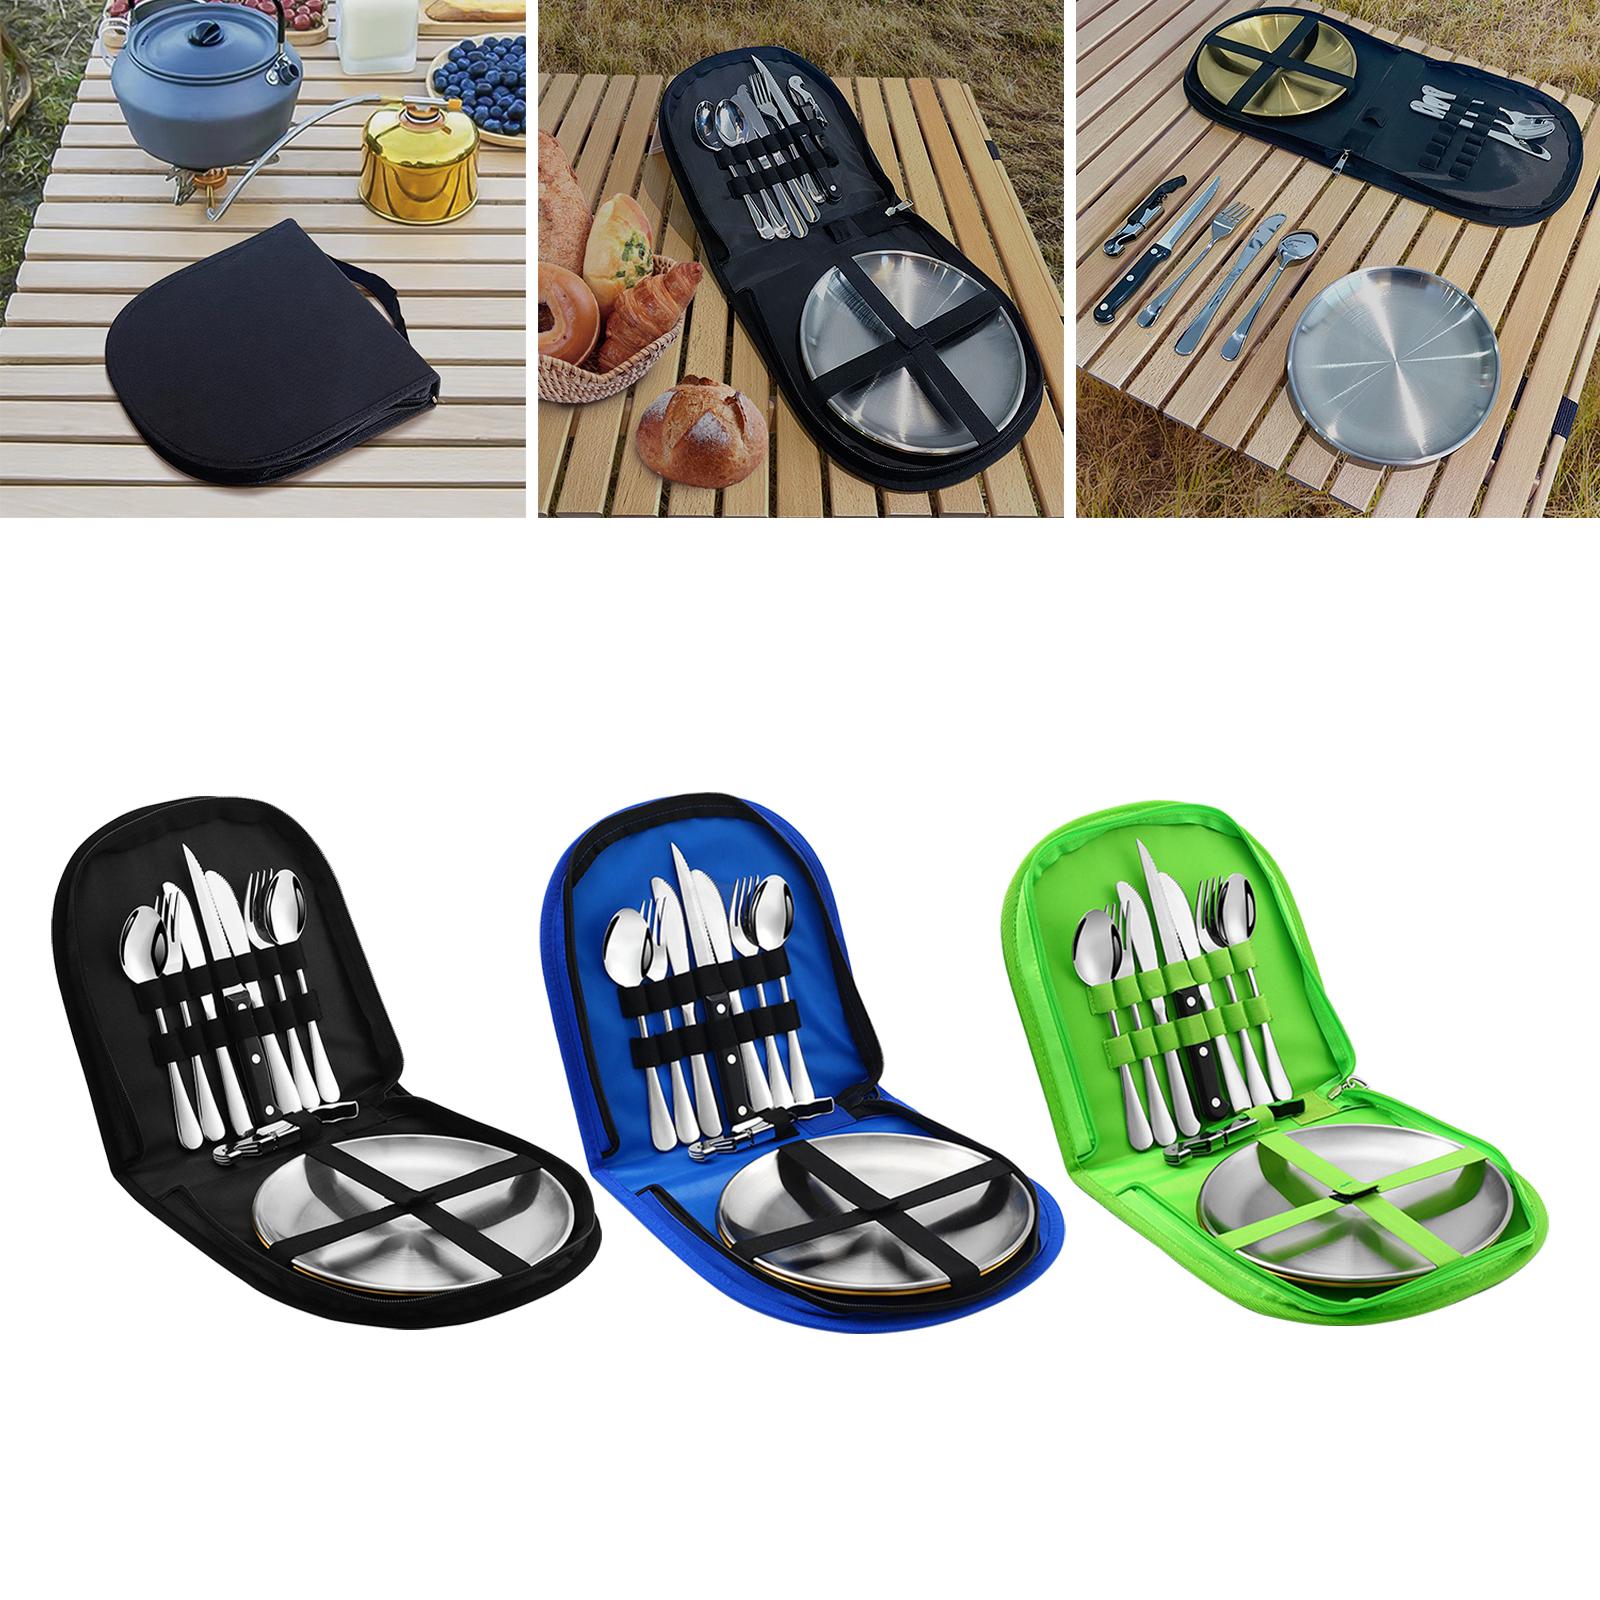 10 Pieces Picnic Family Cutlery Set with Travel Case for Barbecue Hiking Black